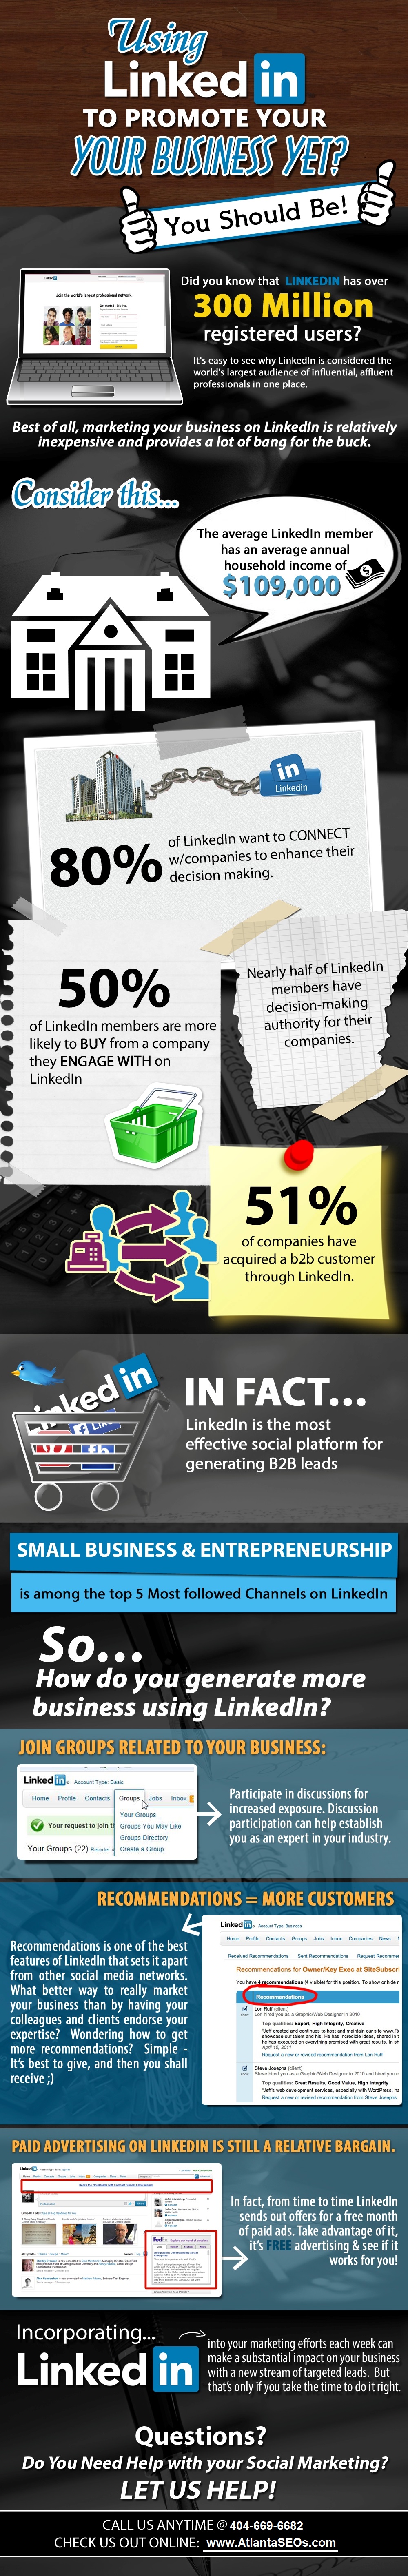 Are You Using LinkedIn for Your Business Yet? (Infographic)